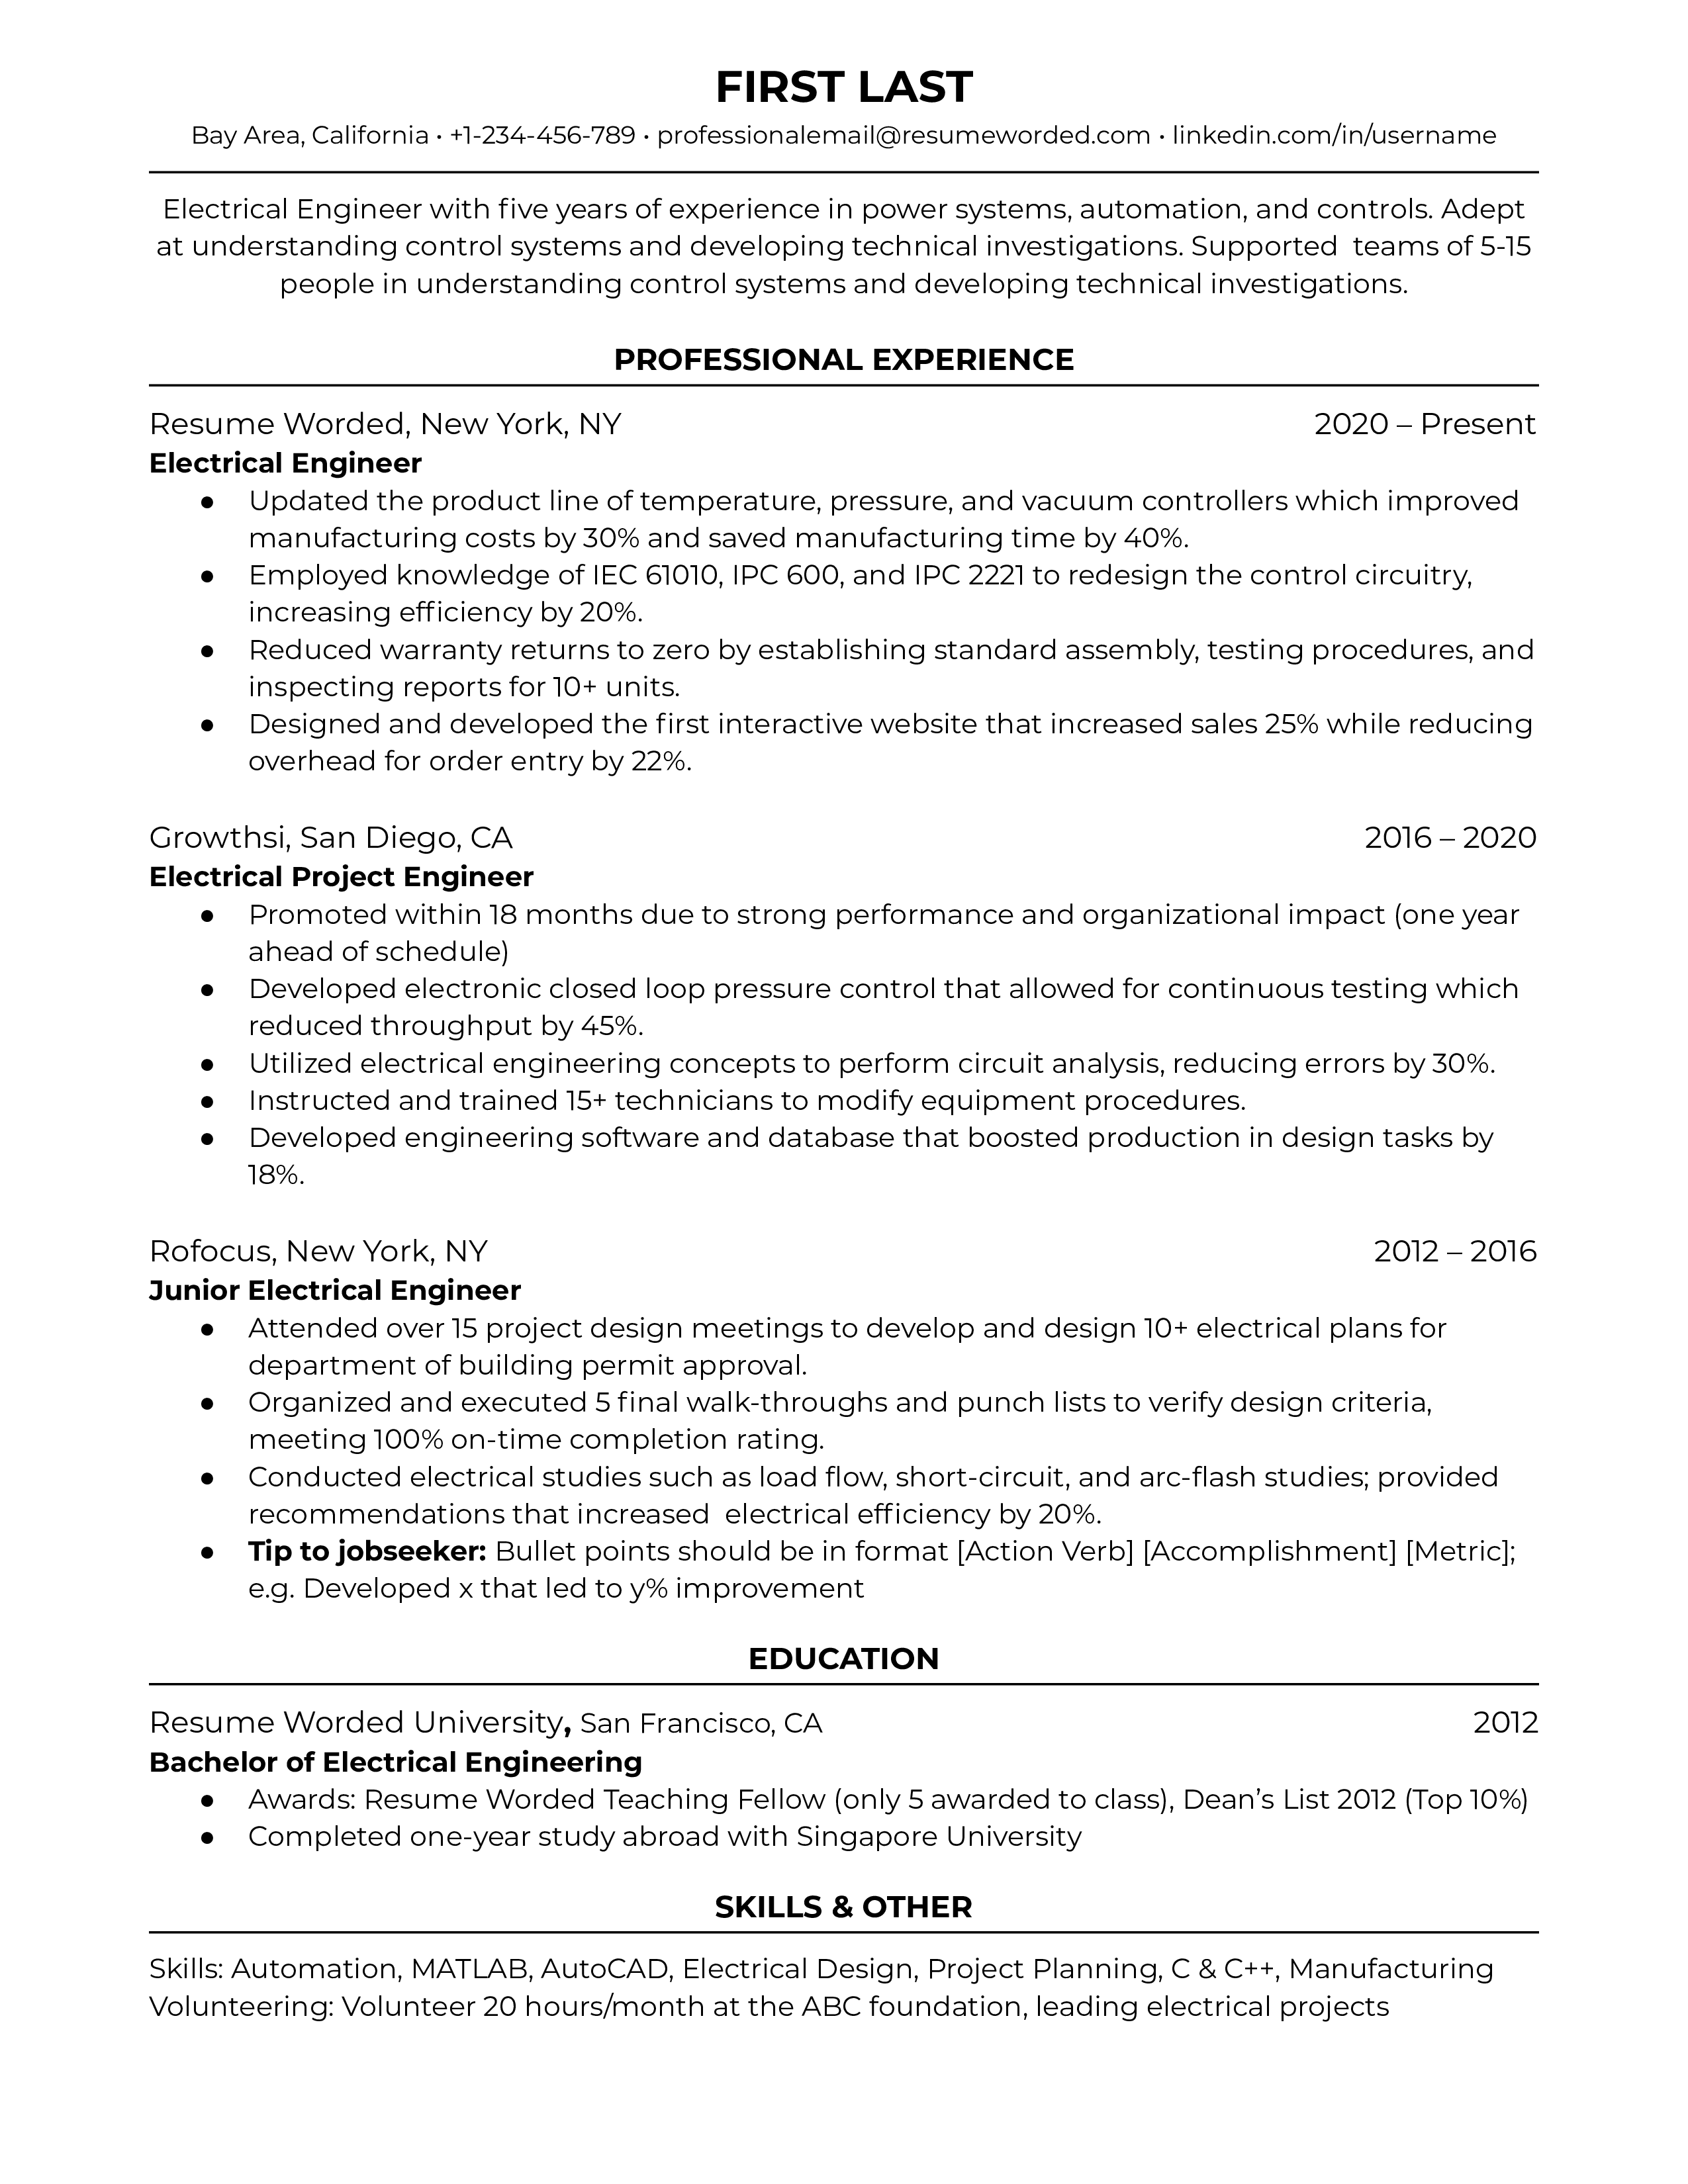 A  seasoned Electrical Engineer resume highlighting expertise in designing and testing electrical systems, troubleshooting and resolving technical issues, and ensuring safety and efficiency in all electrical systems and components.